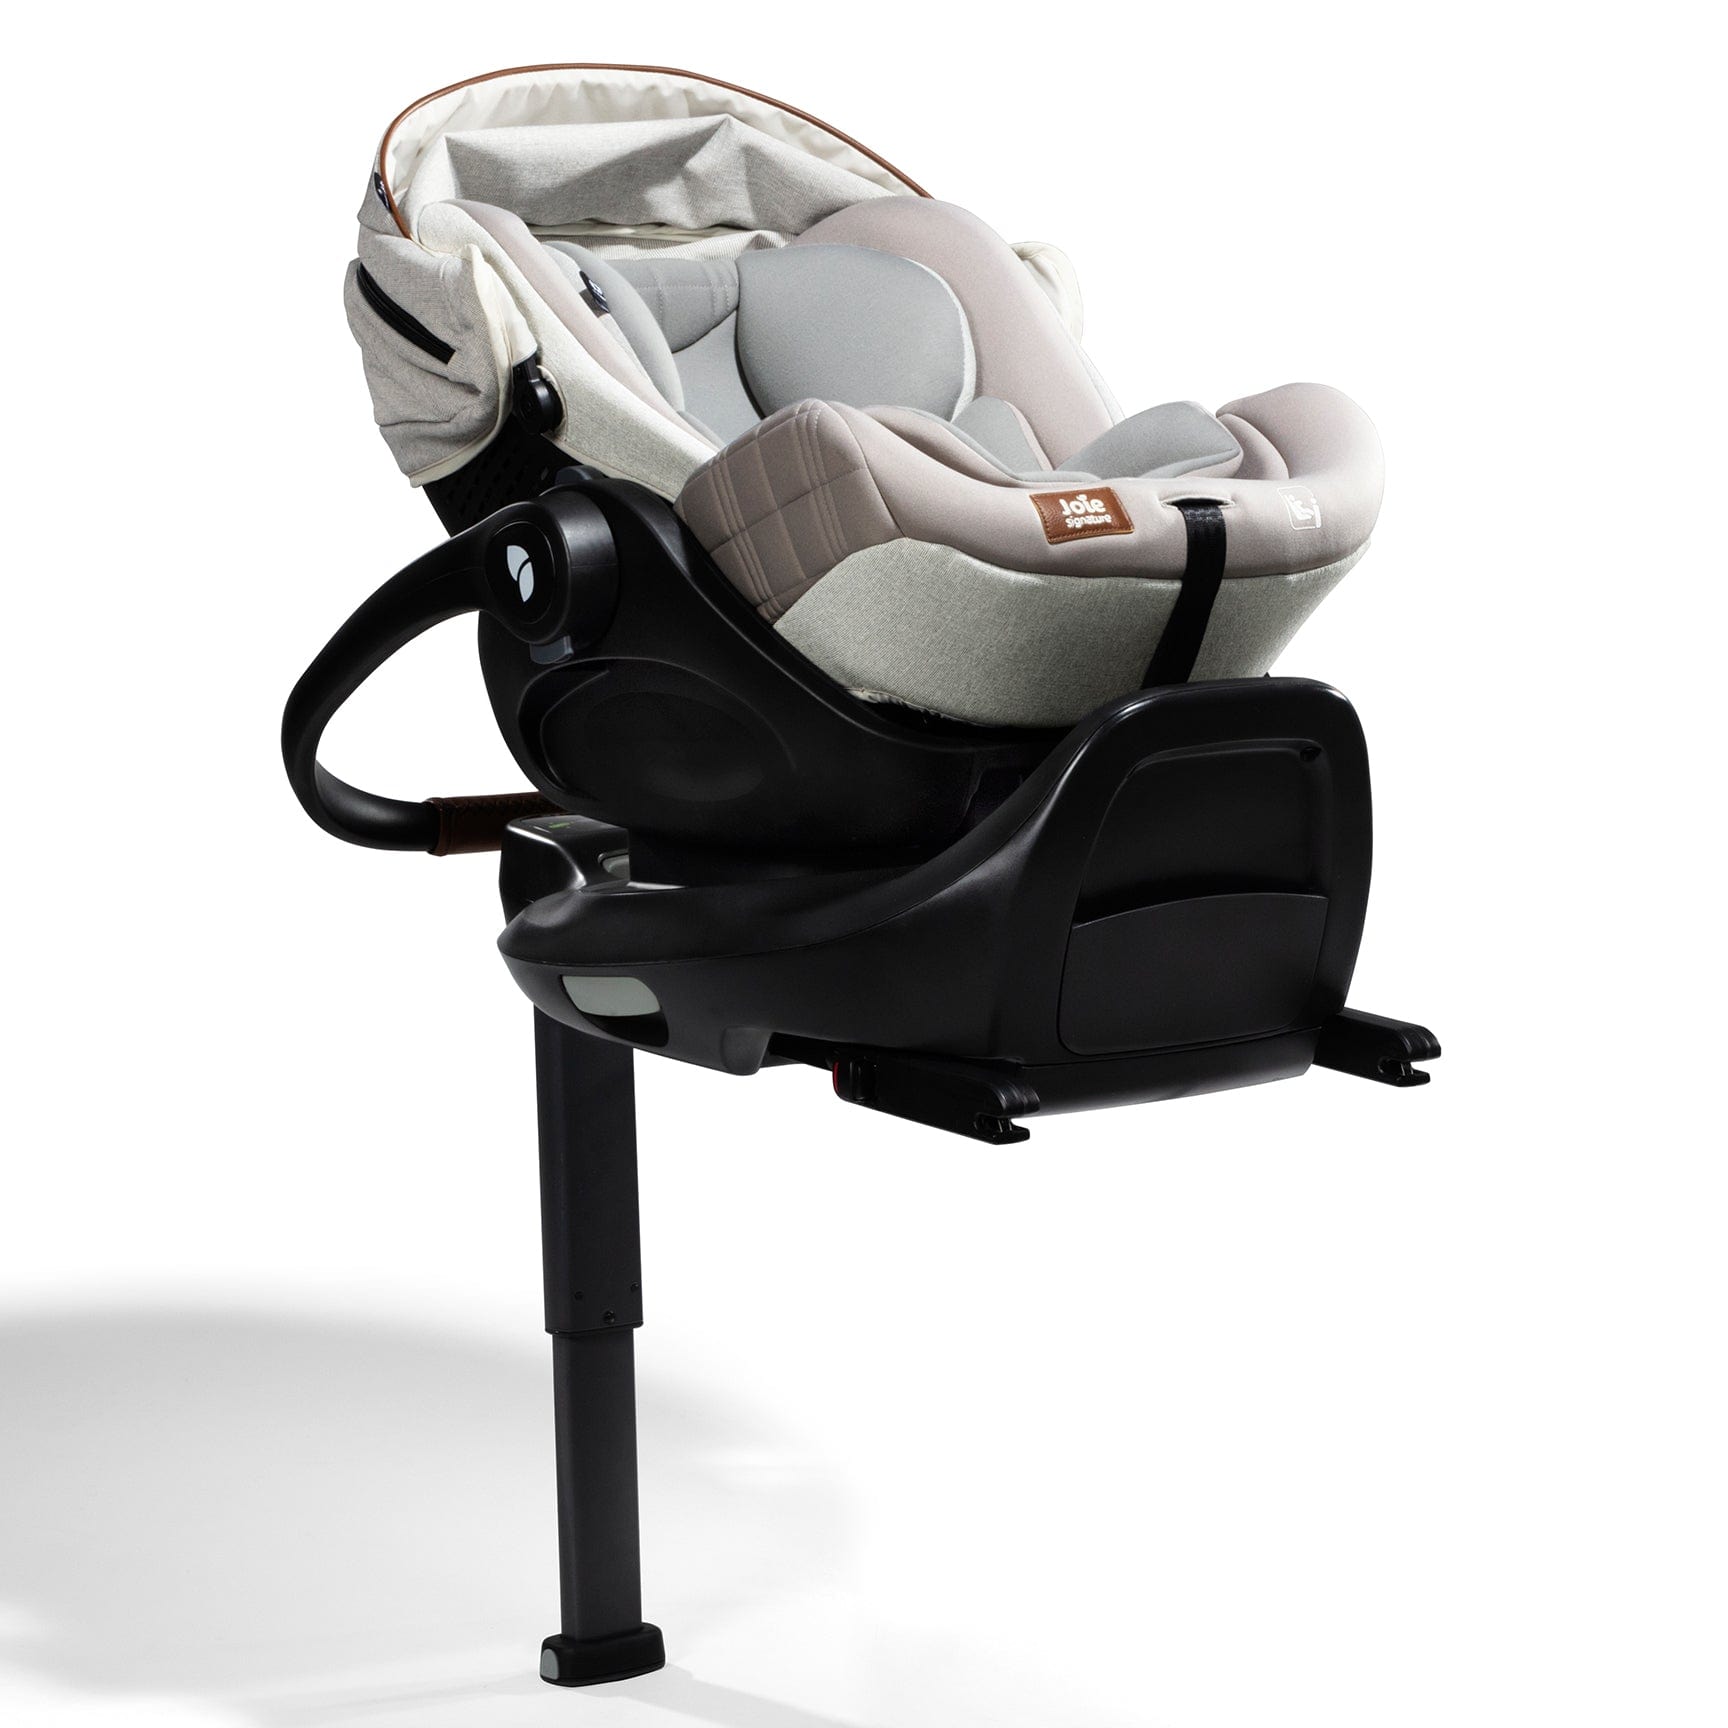 Joie baby car seats Joie i-Level Recline Signature Car Seat & i-Base Encore - Oyster 12224-OYS